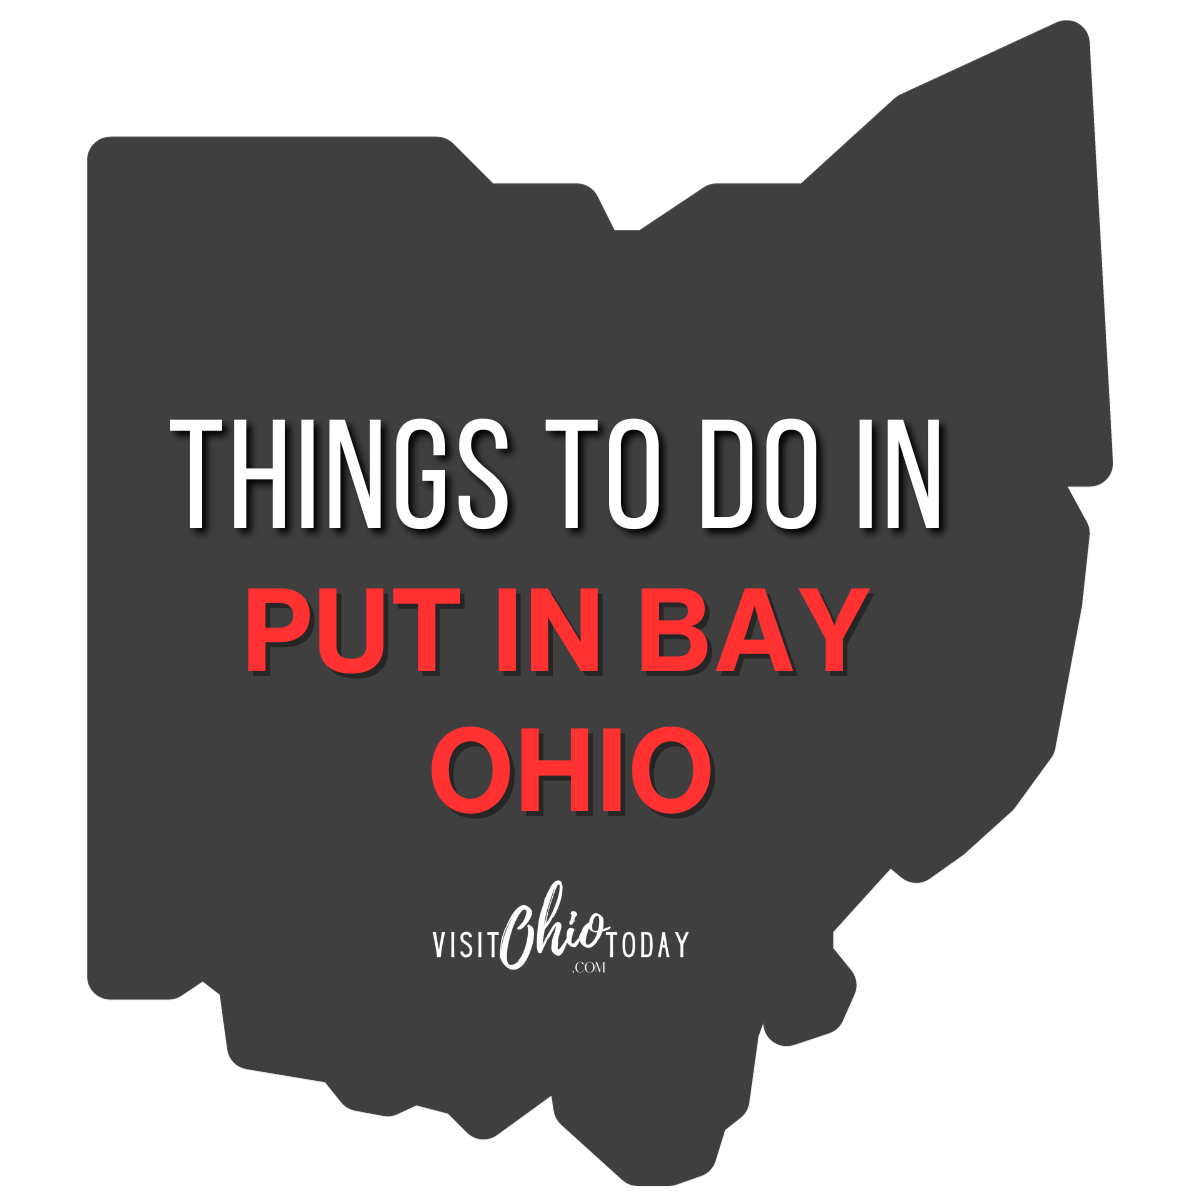 Things to do in Put in Bay Tour Guide) Visit Ohio Today